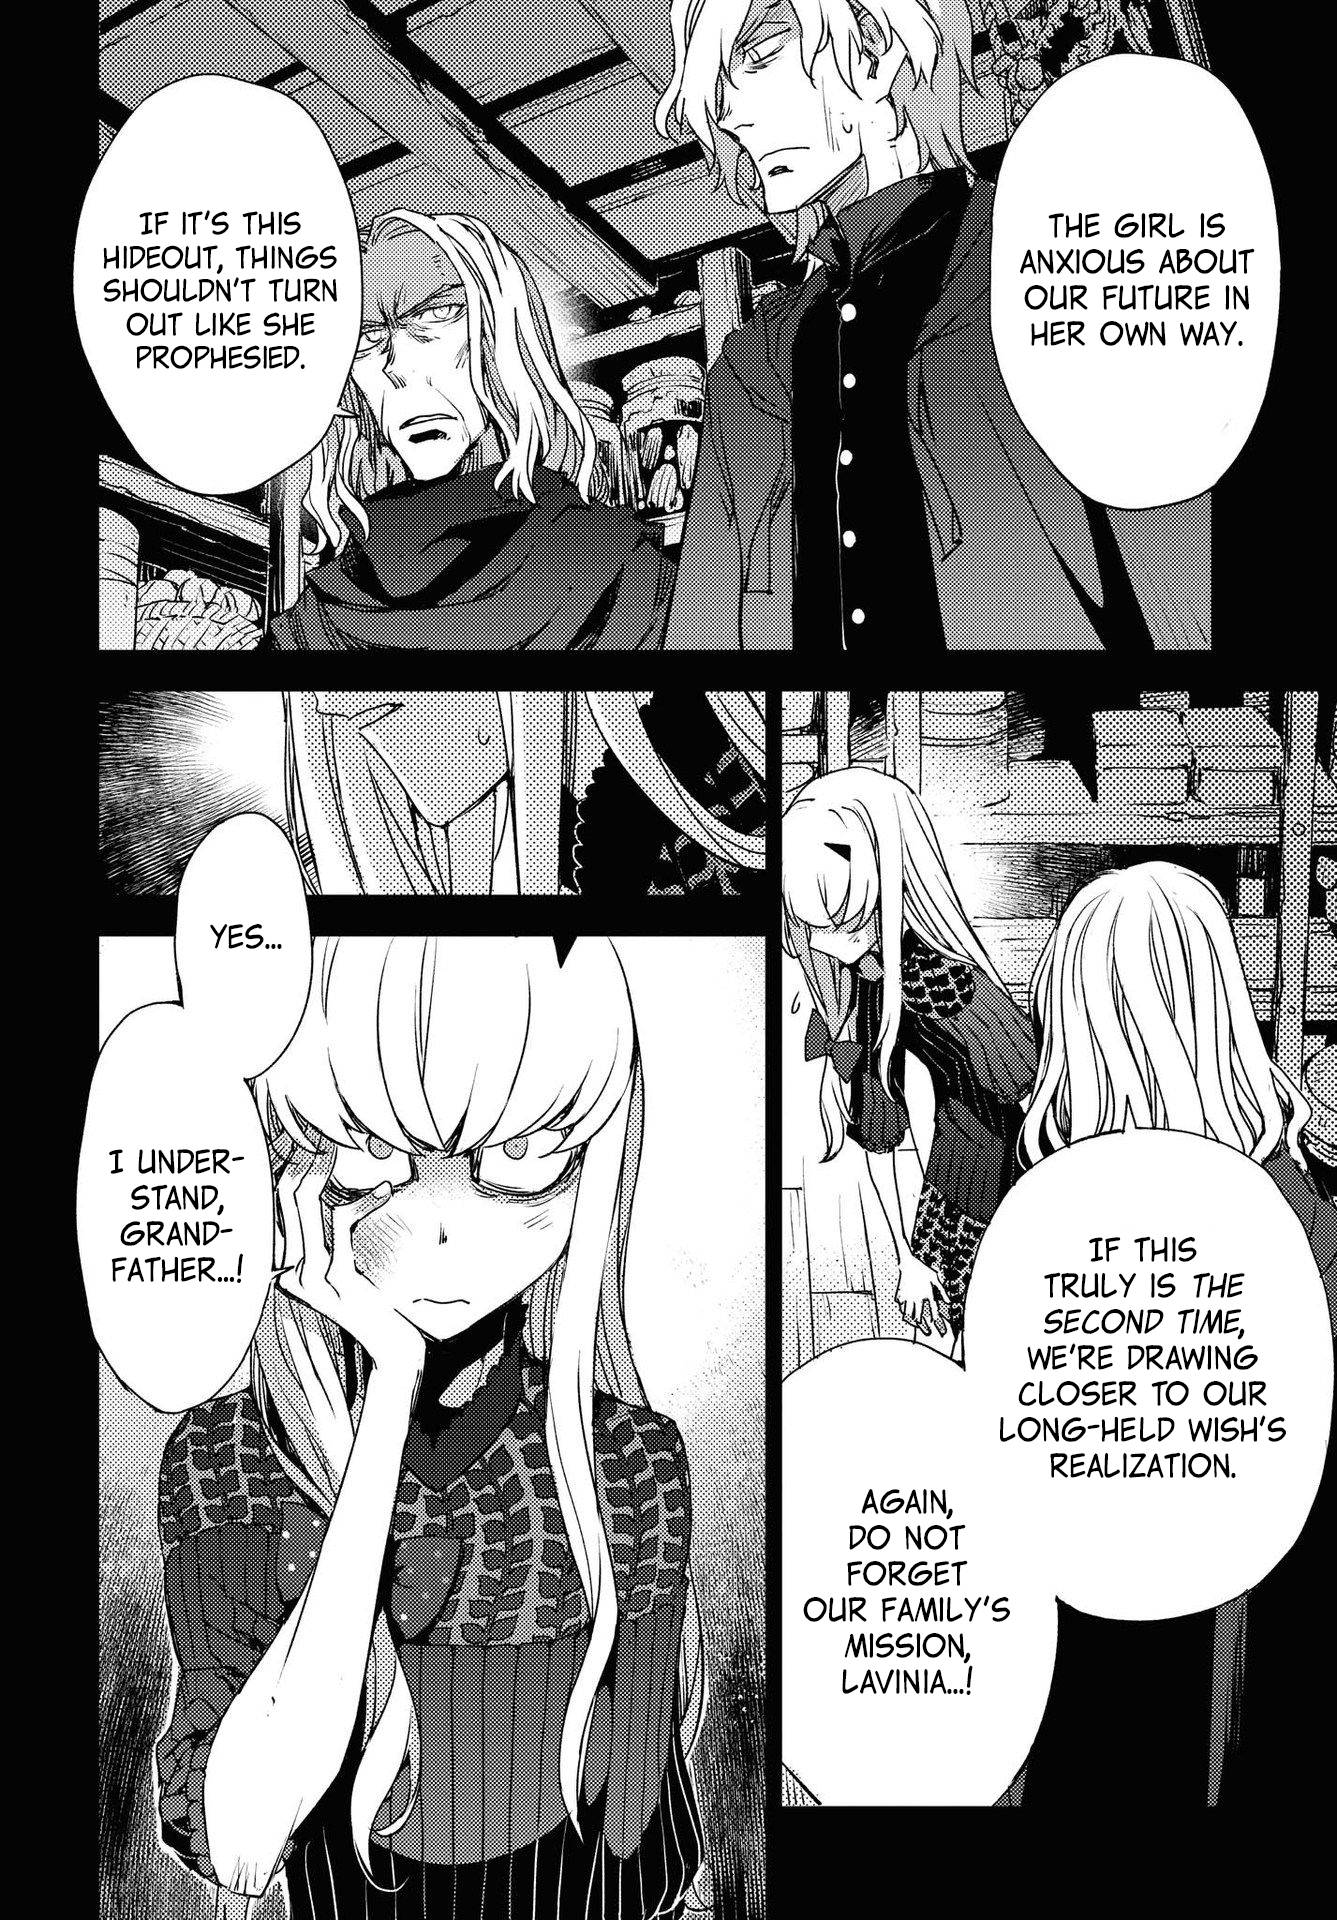 Fate/Grand Order: Epic of Remnant - Subspecies Singularity IV: Taboo Advent Salem: Salem of Heresy - chapter 21 - #2